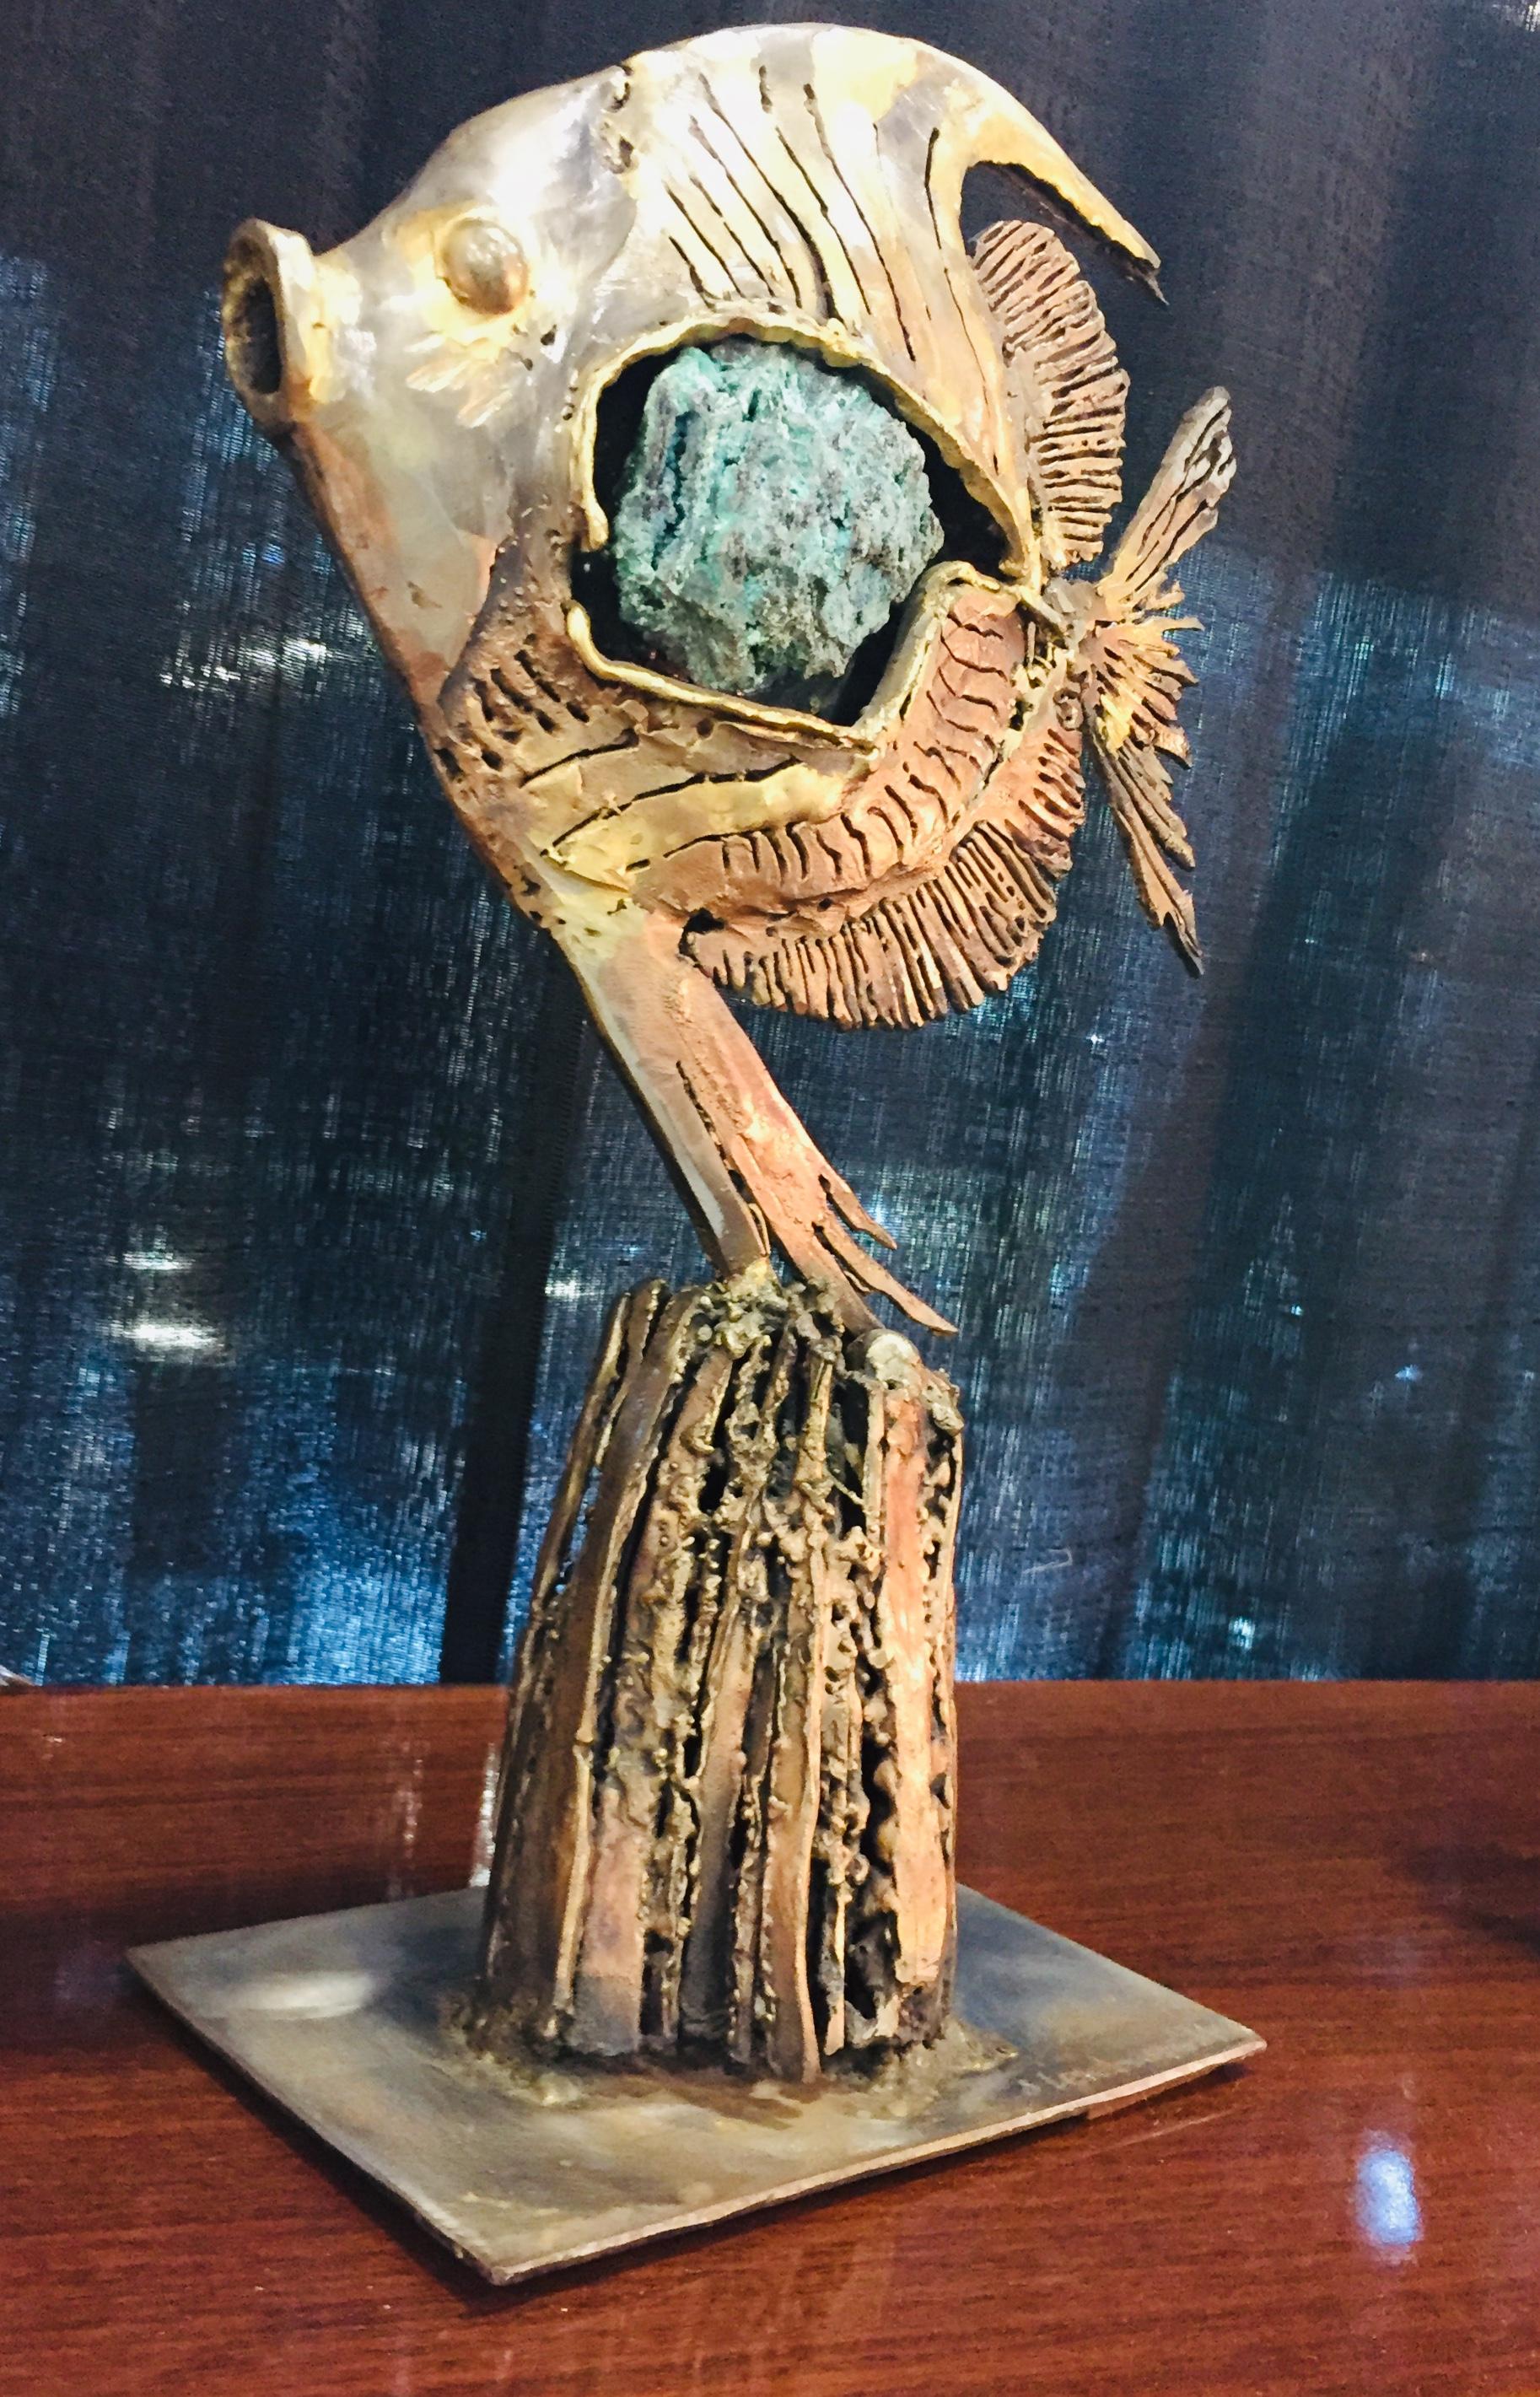 French Gilt Brass Sculpture and Turquoise Stone Included in the Body of the Fish